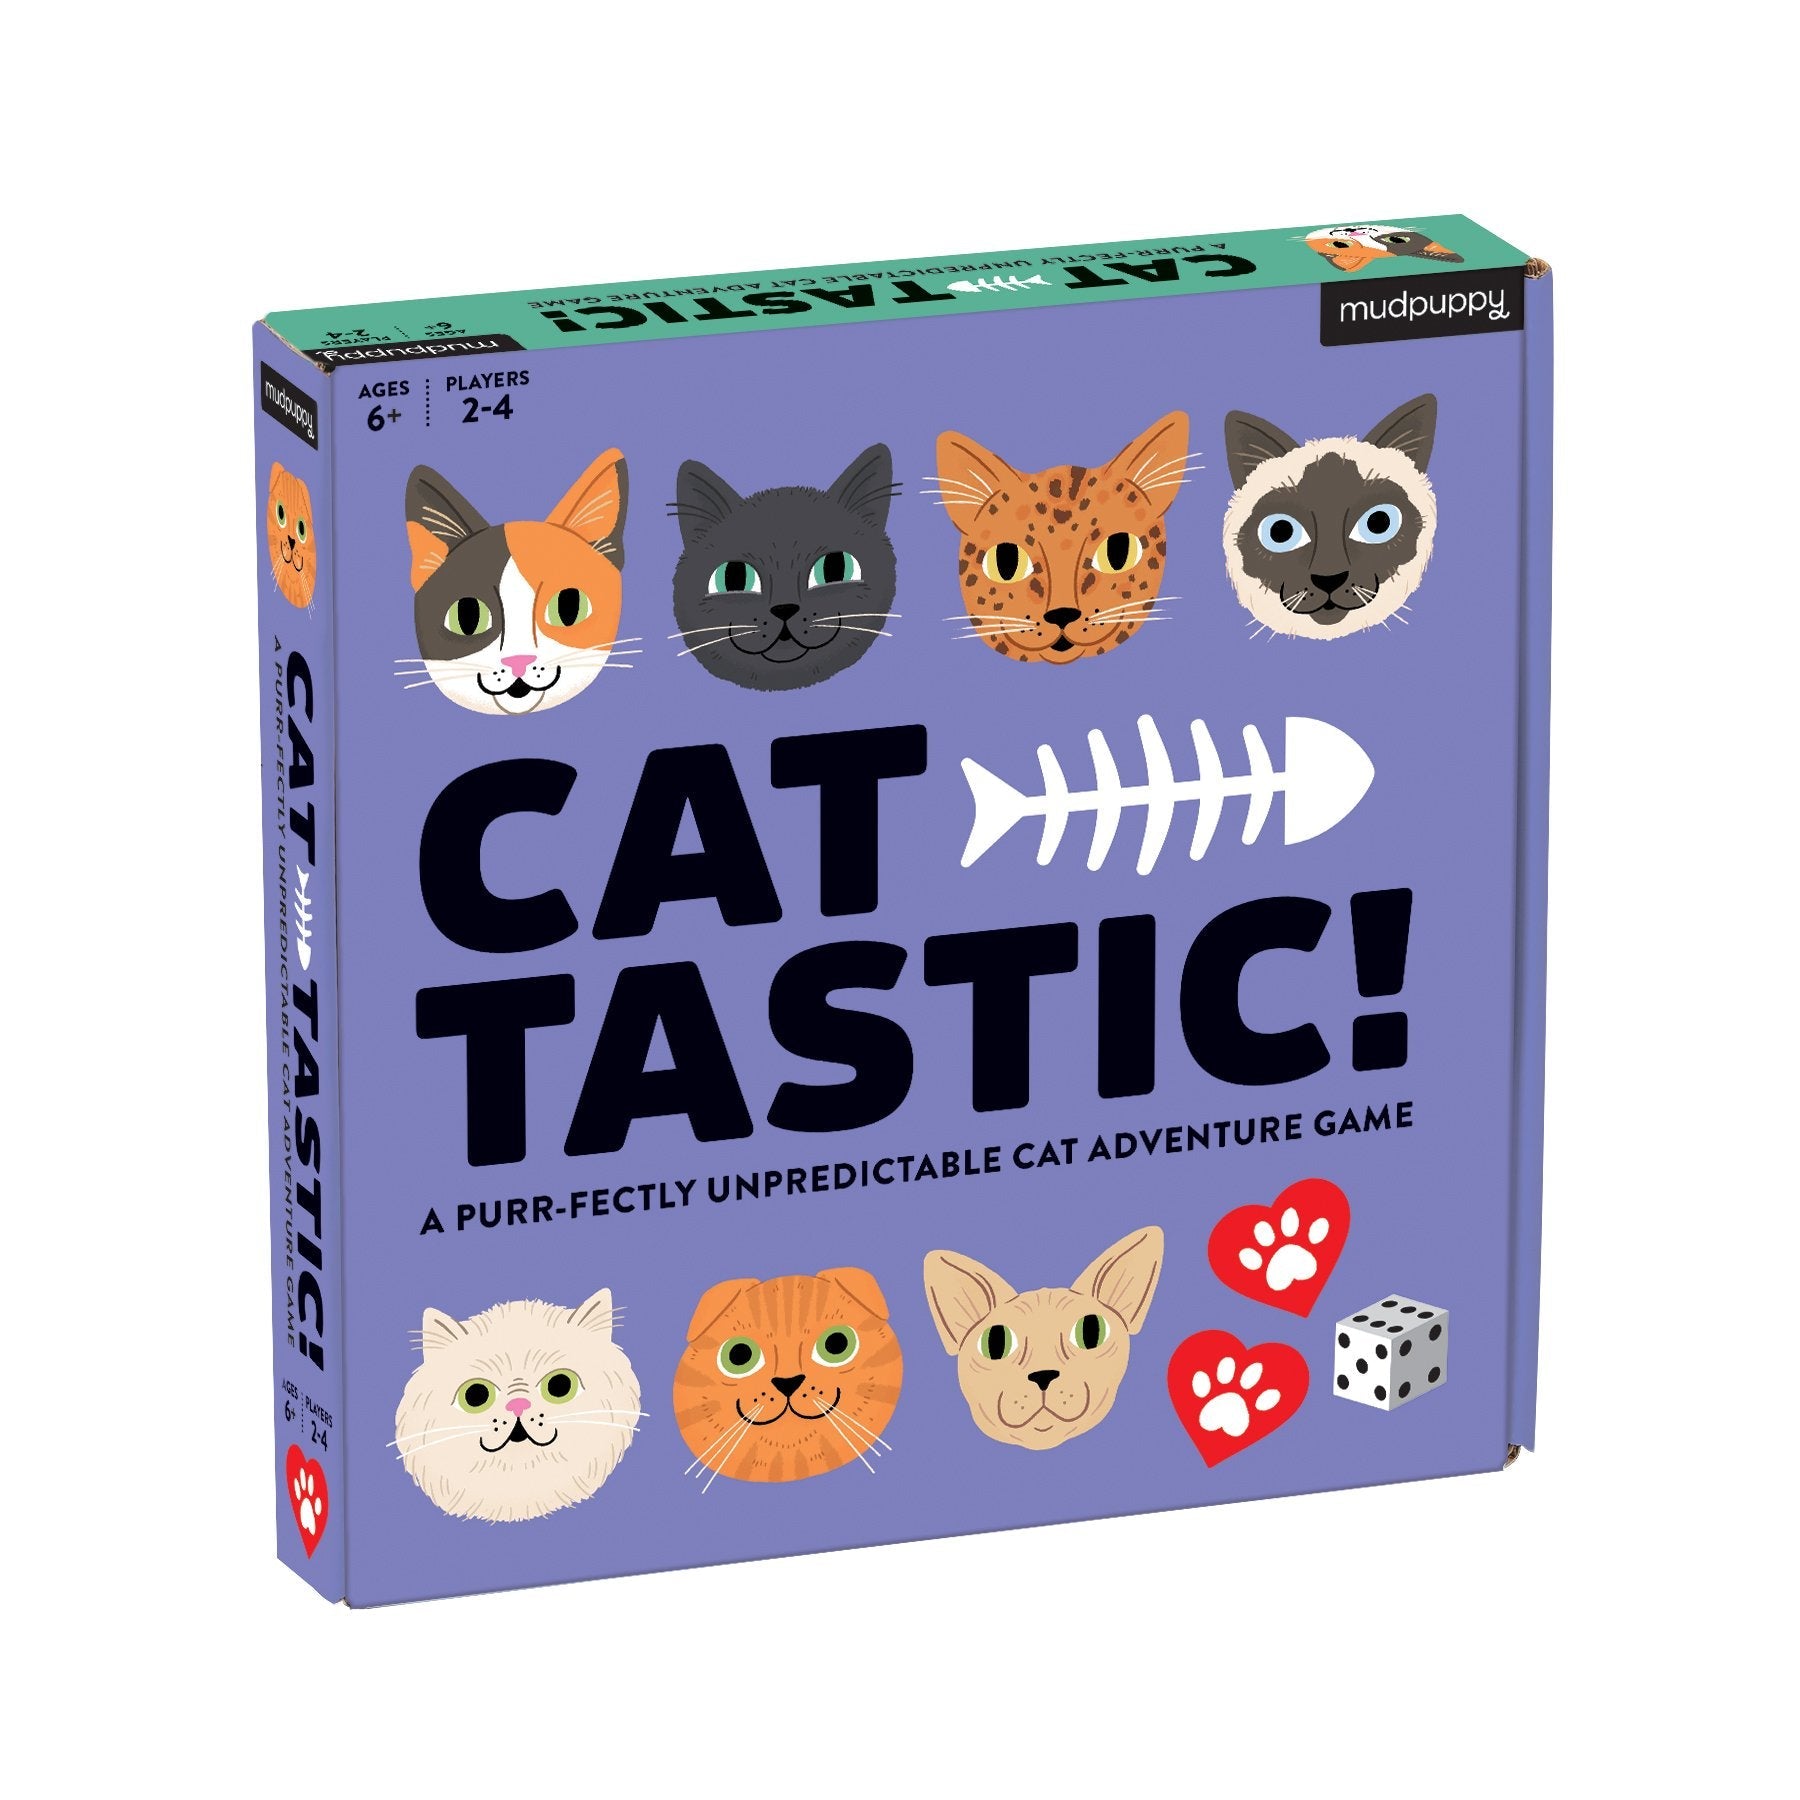 Meow! The Cult of Cat, Board Game